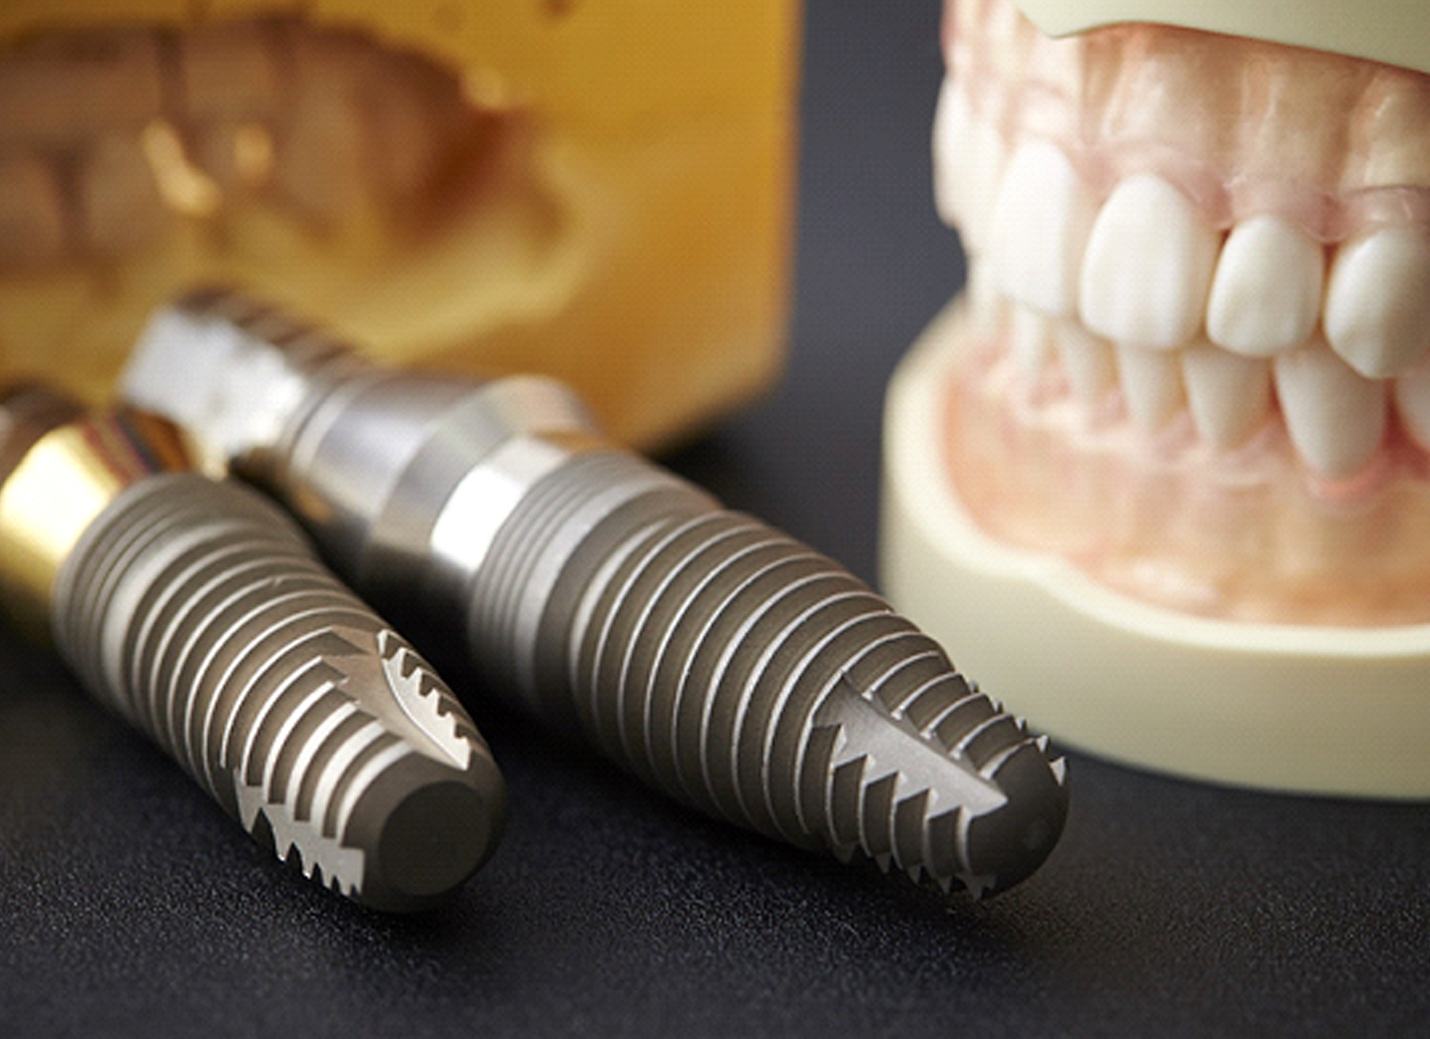 titanium implants sitting next to a model of a mouth